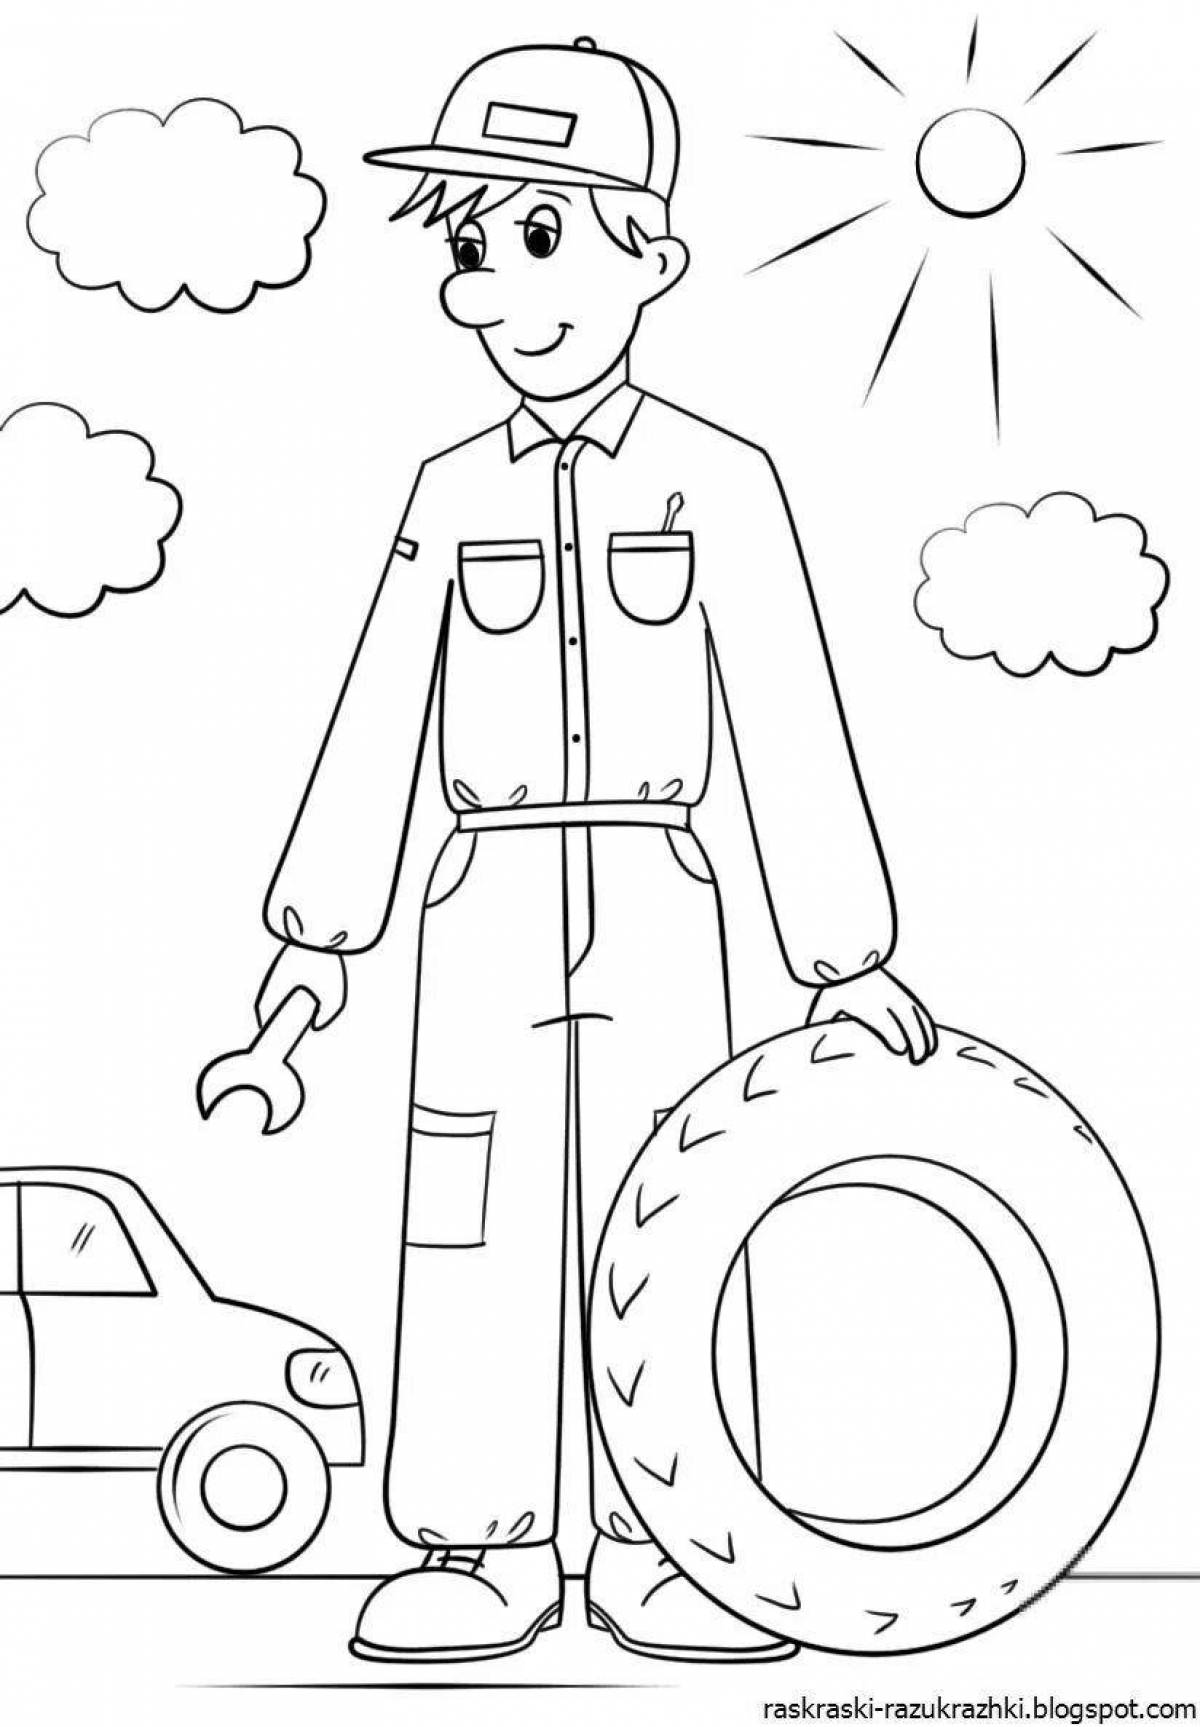 Colorful mechanic coloring page